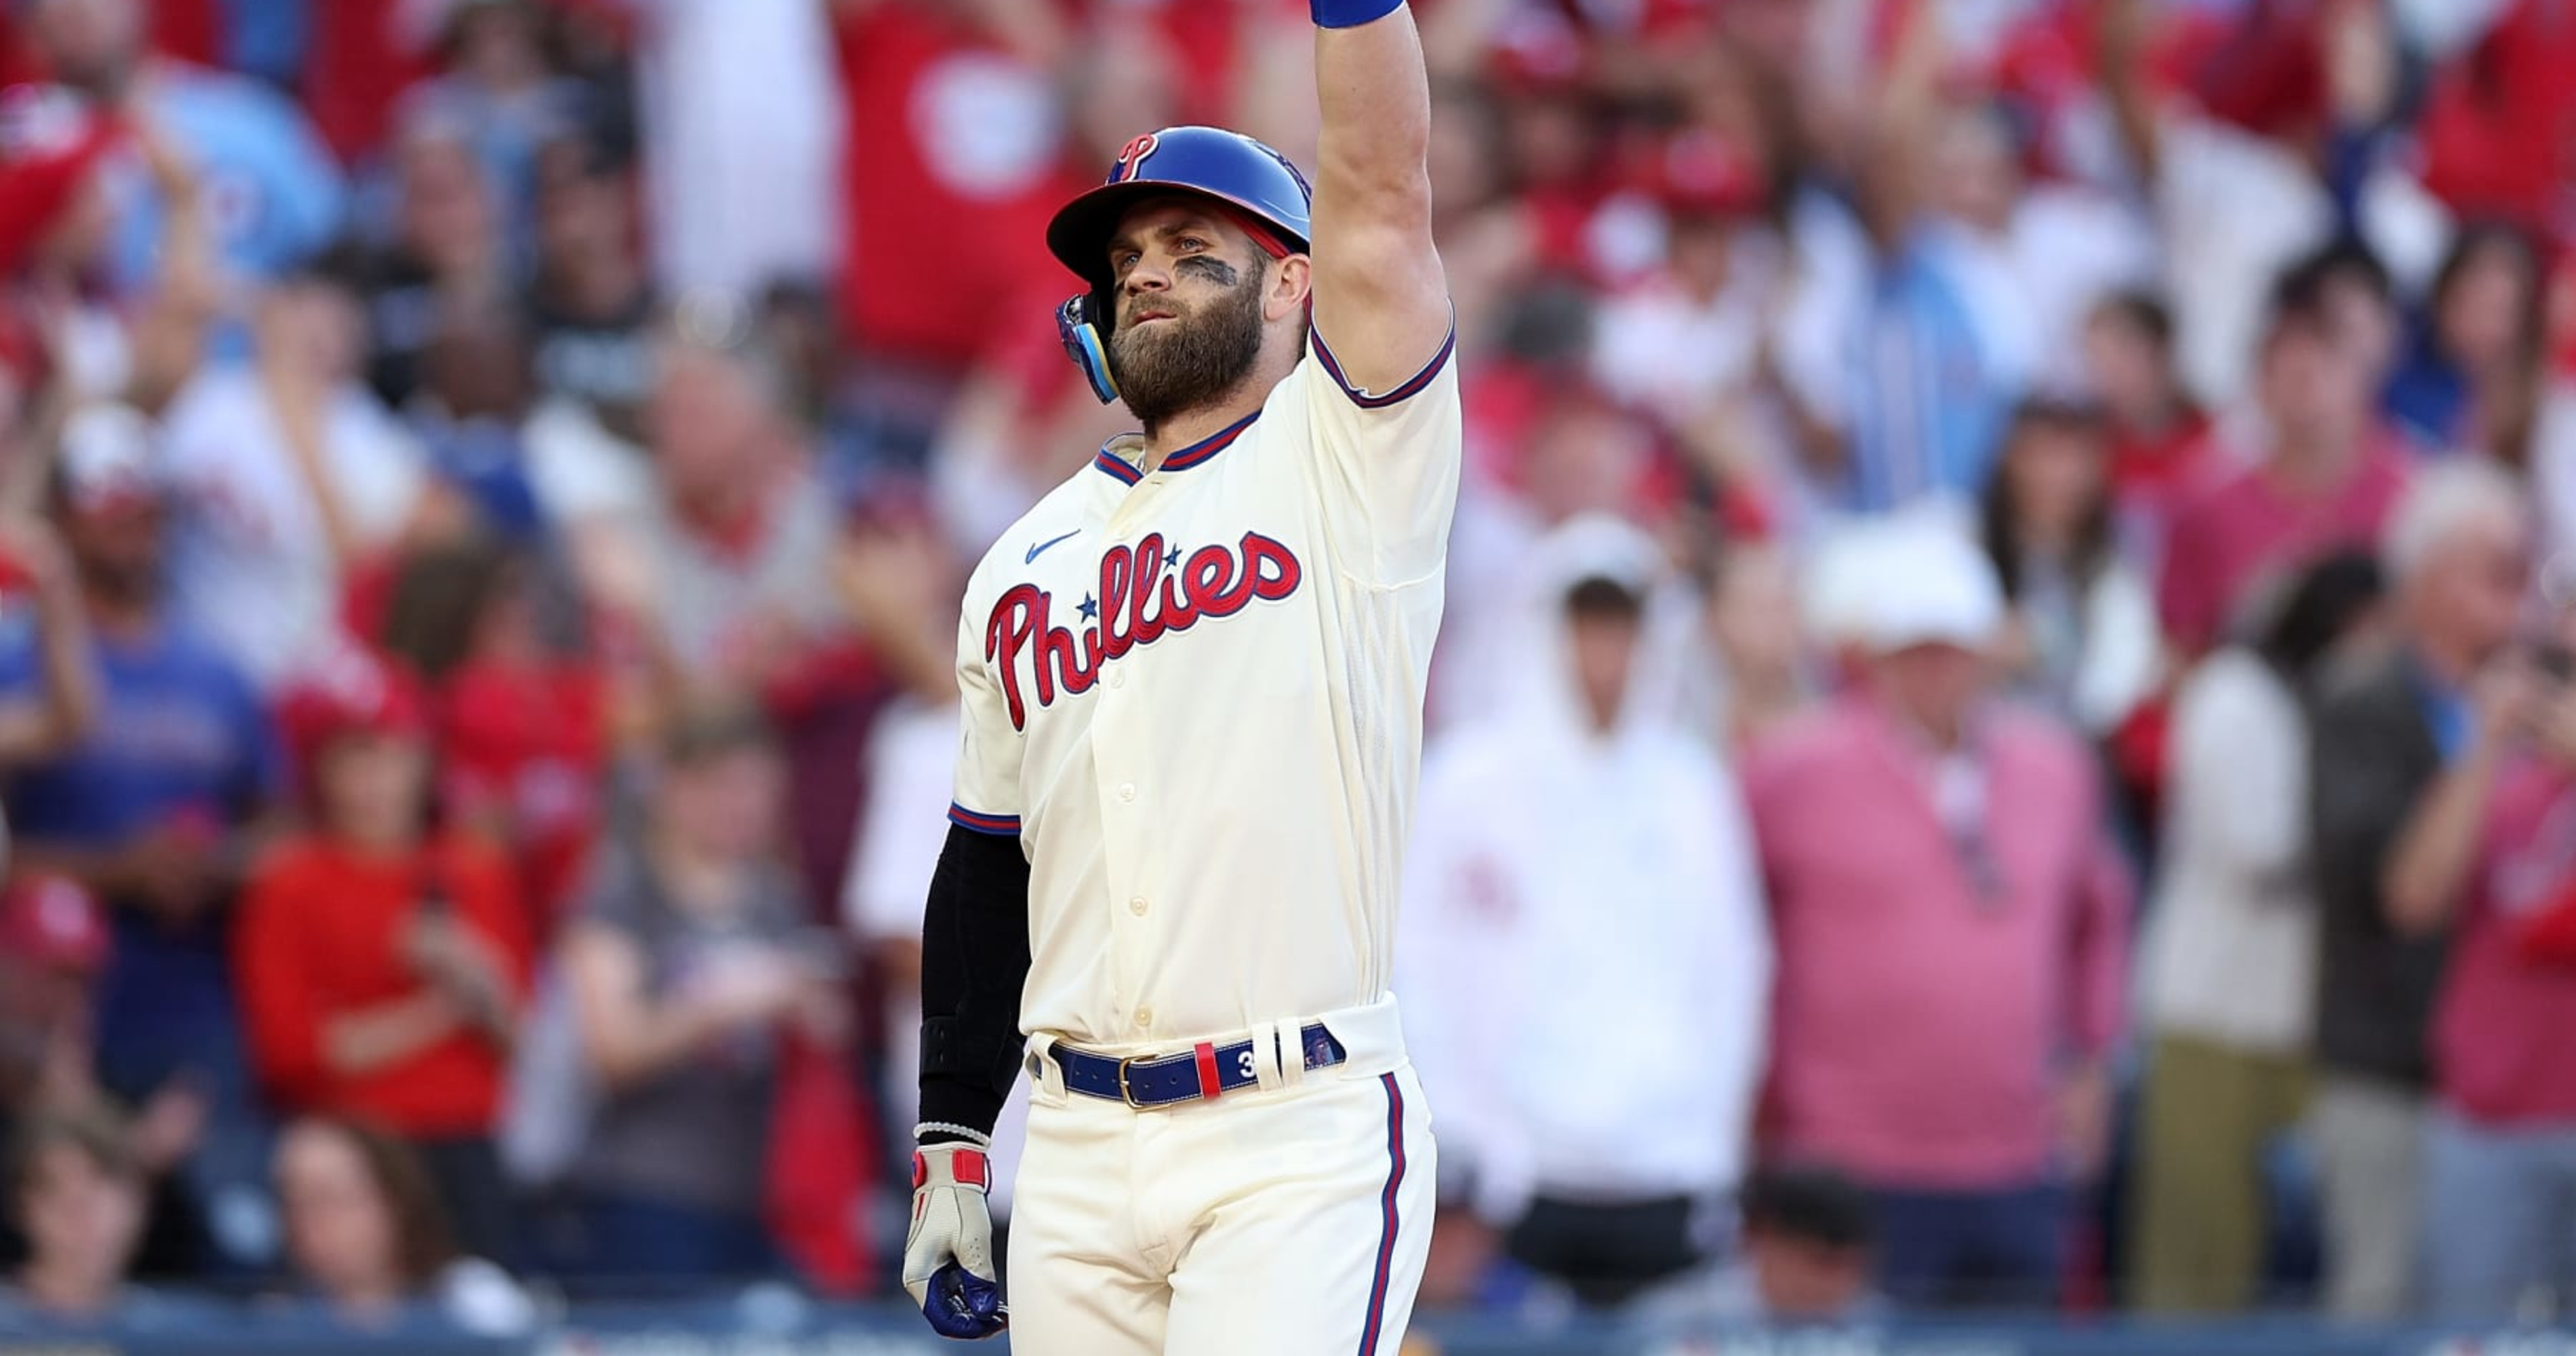 Bryce Harper Is Back, Just in Time to Take On the October Demons